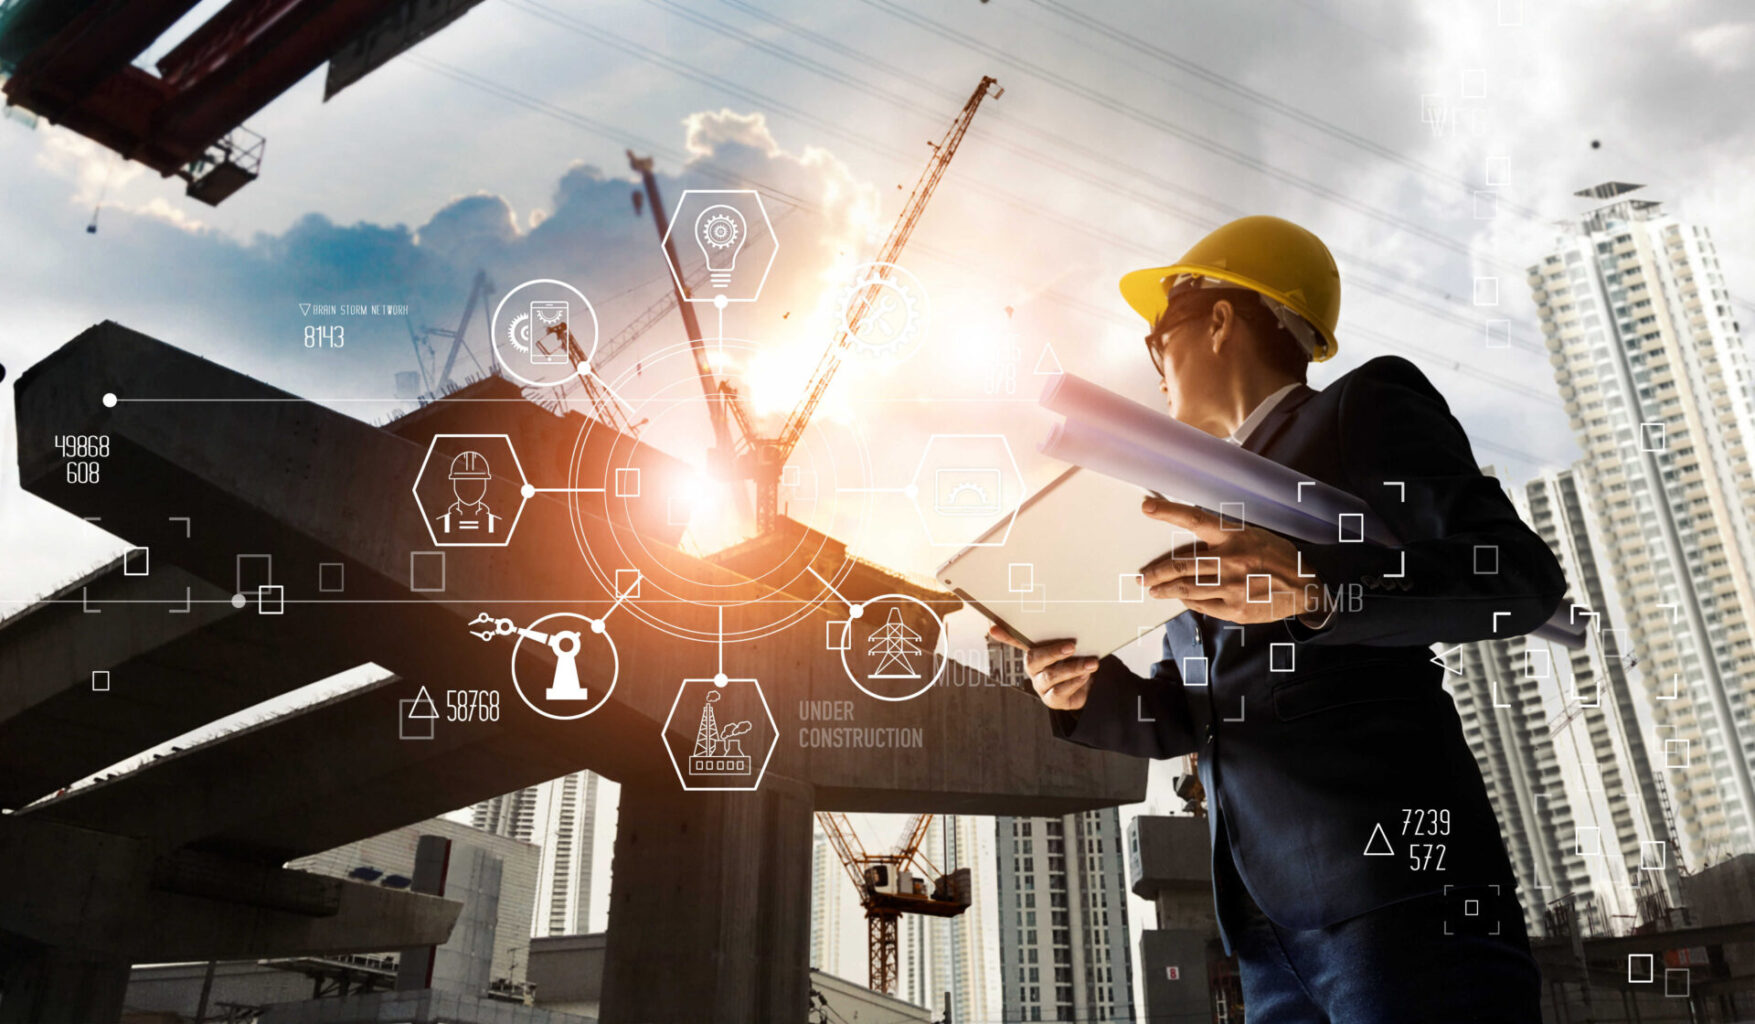 applications of IoT in construction industry